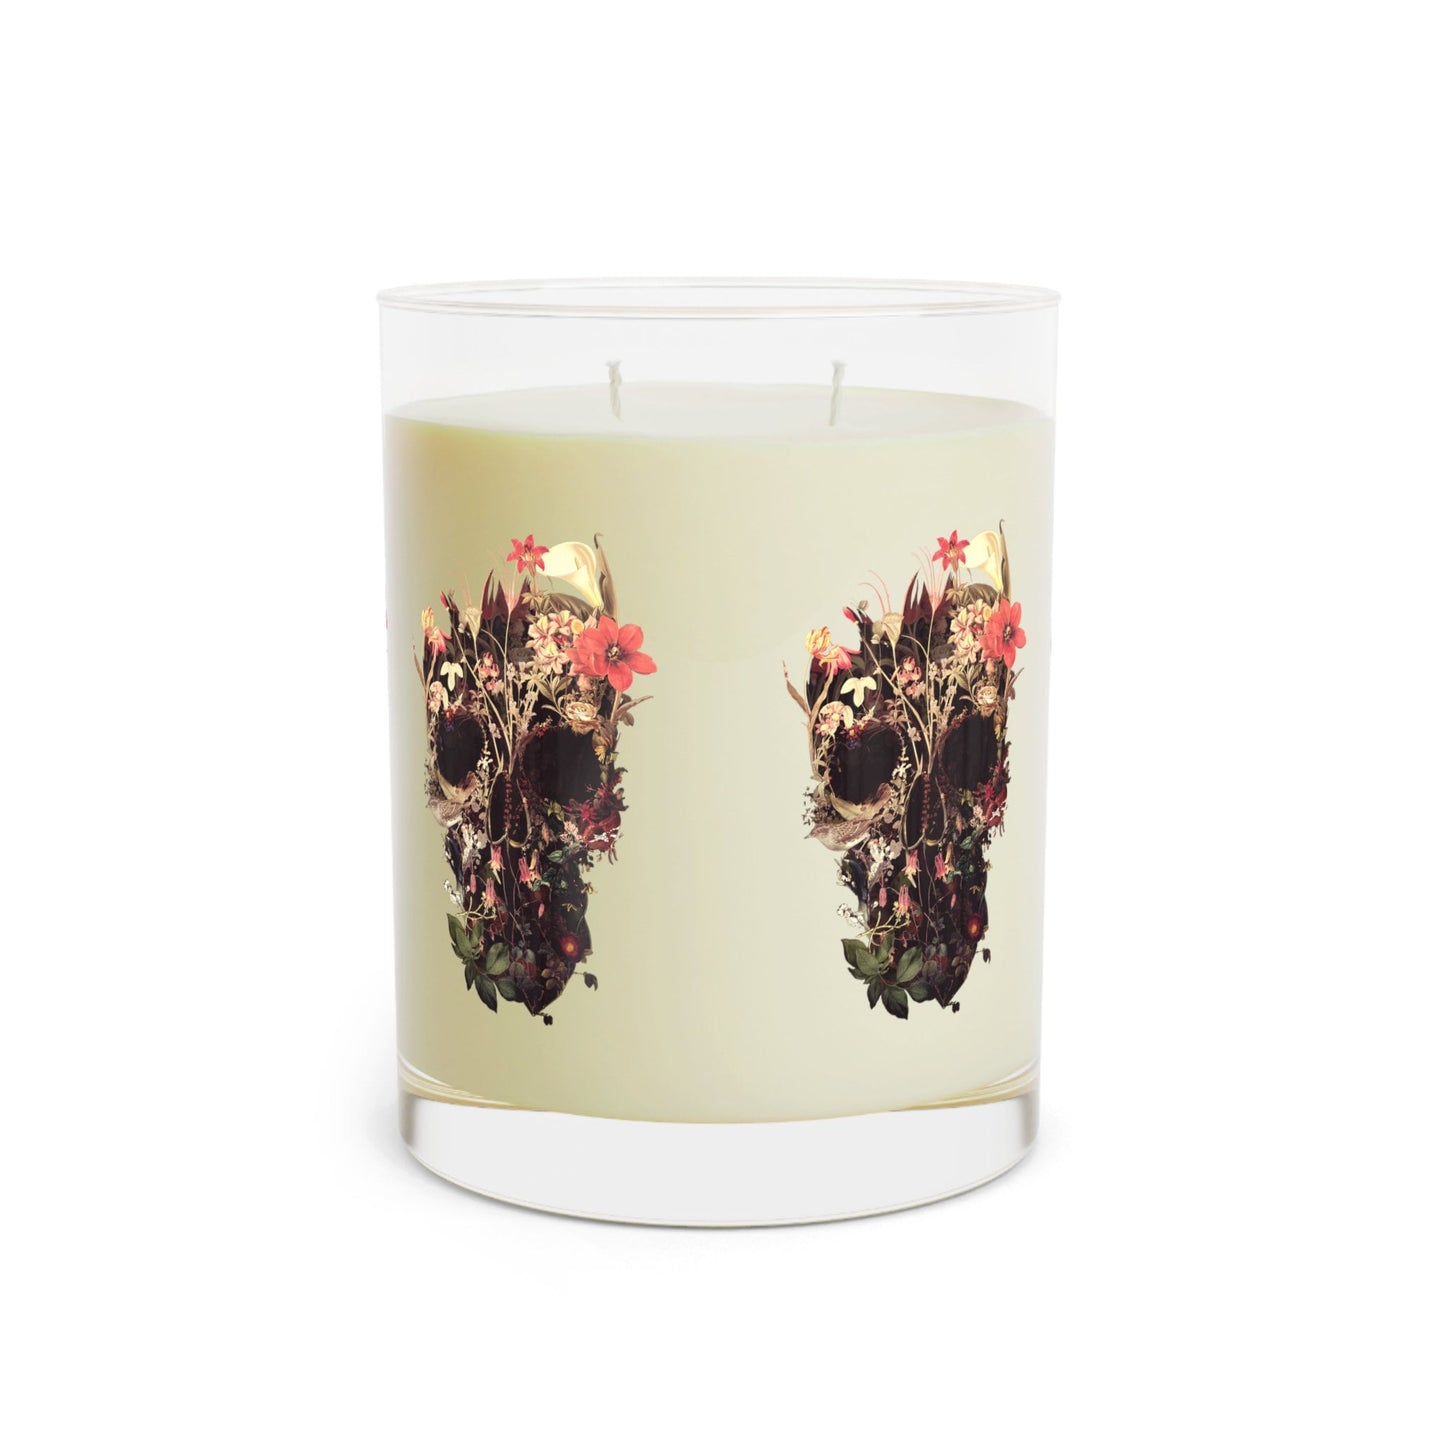 Bloom Skull Scented Candle - Full Glass, 11oz